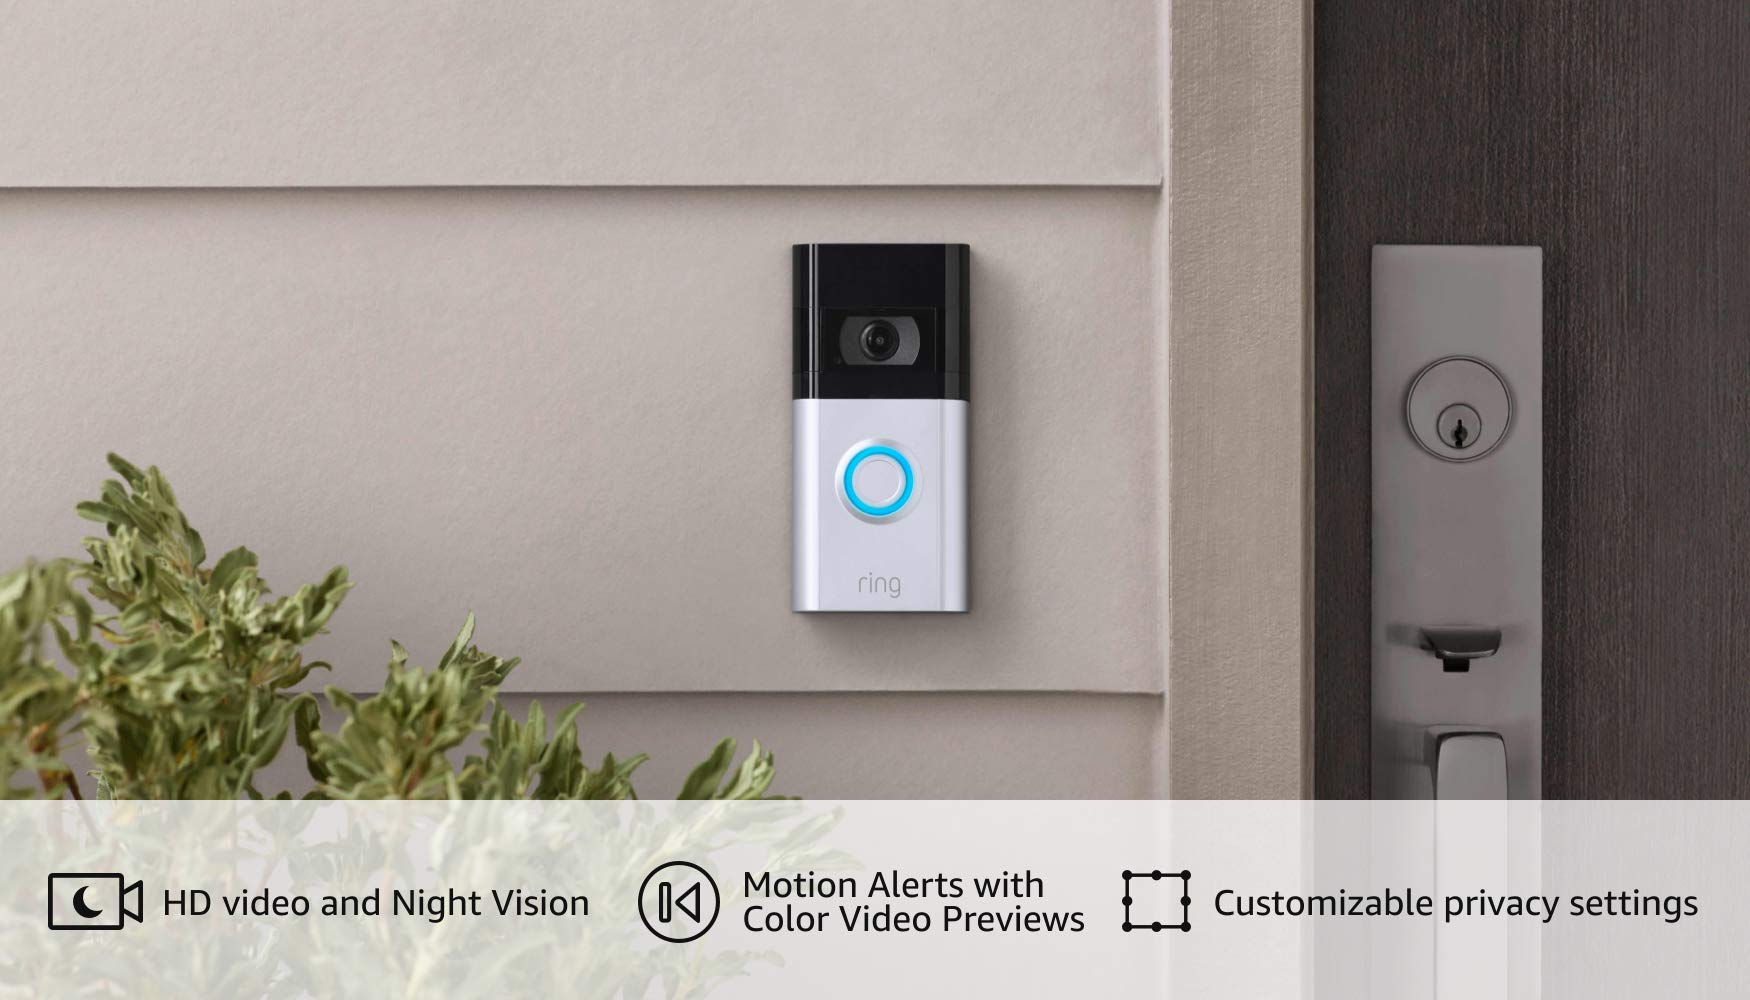 Ring Video Doorbell 4 – improved 4-second color video previews plus easy installation, and enhanced wifi